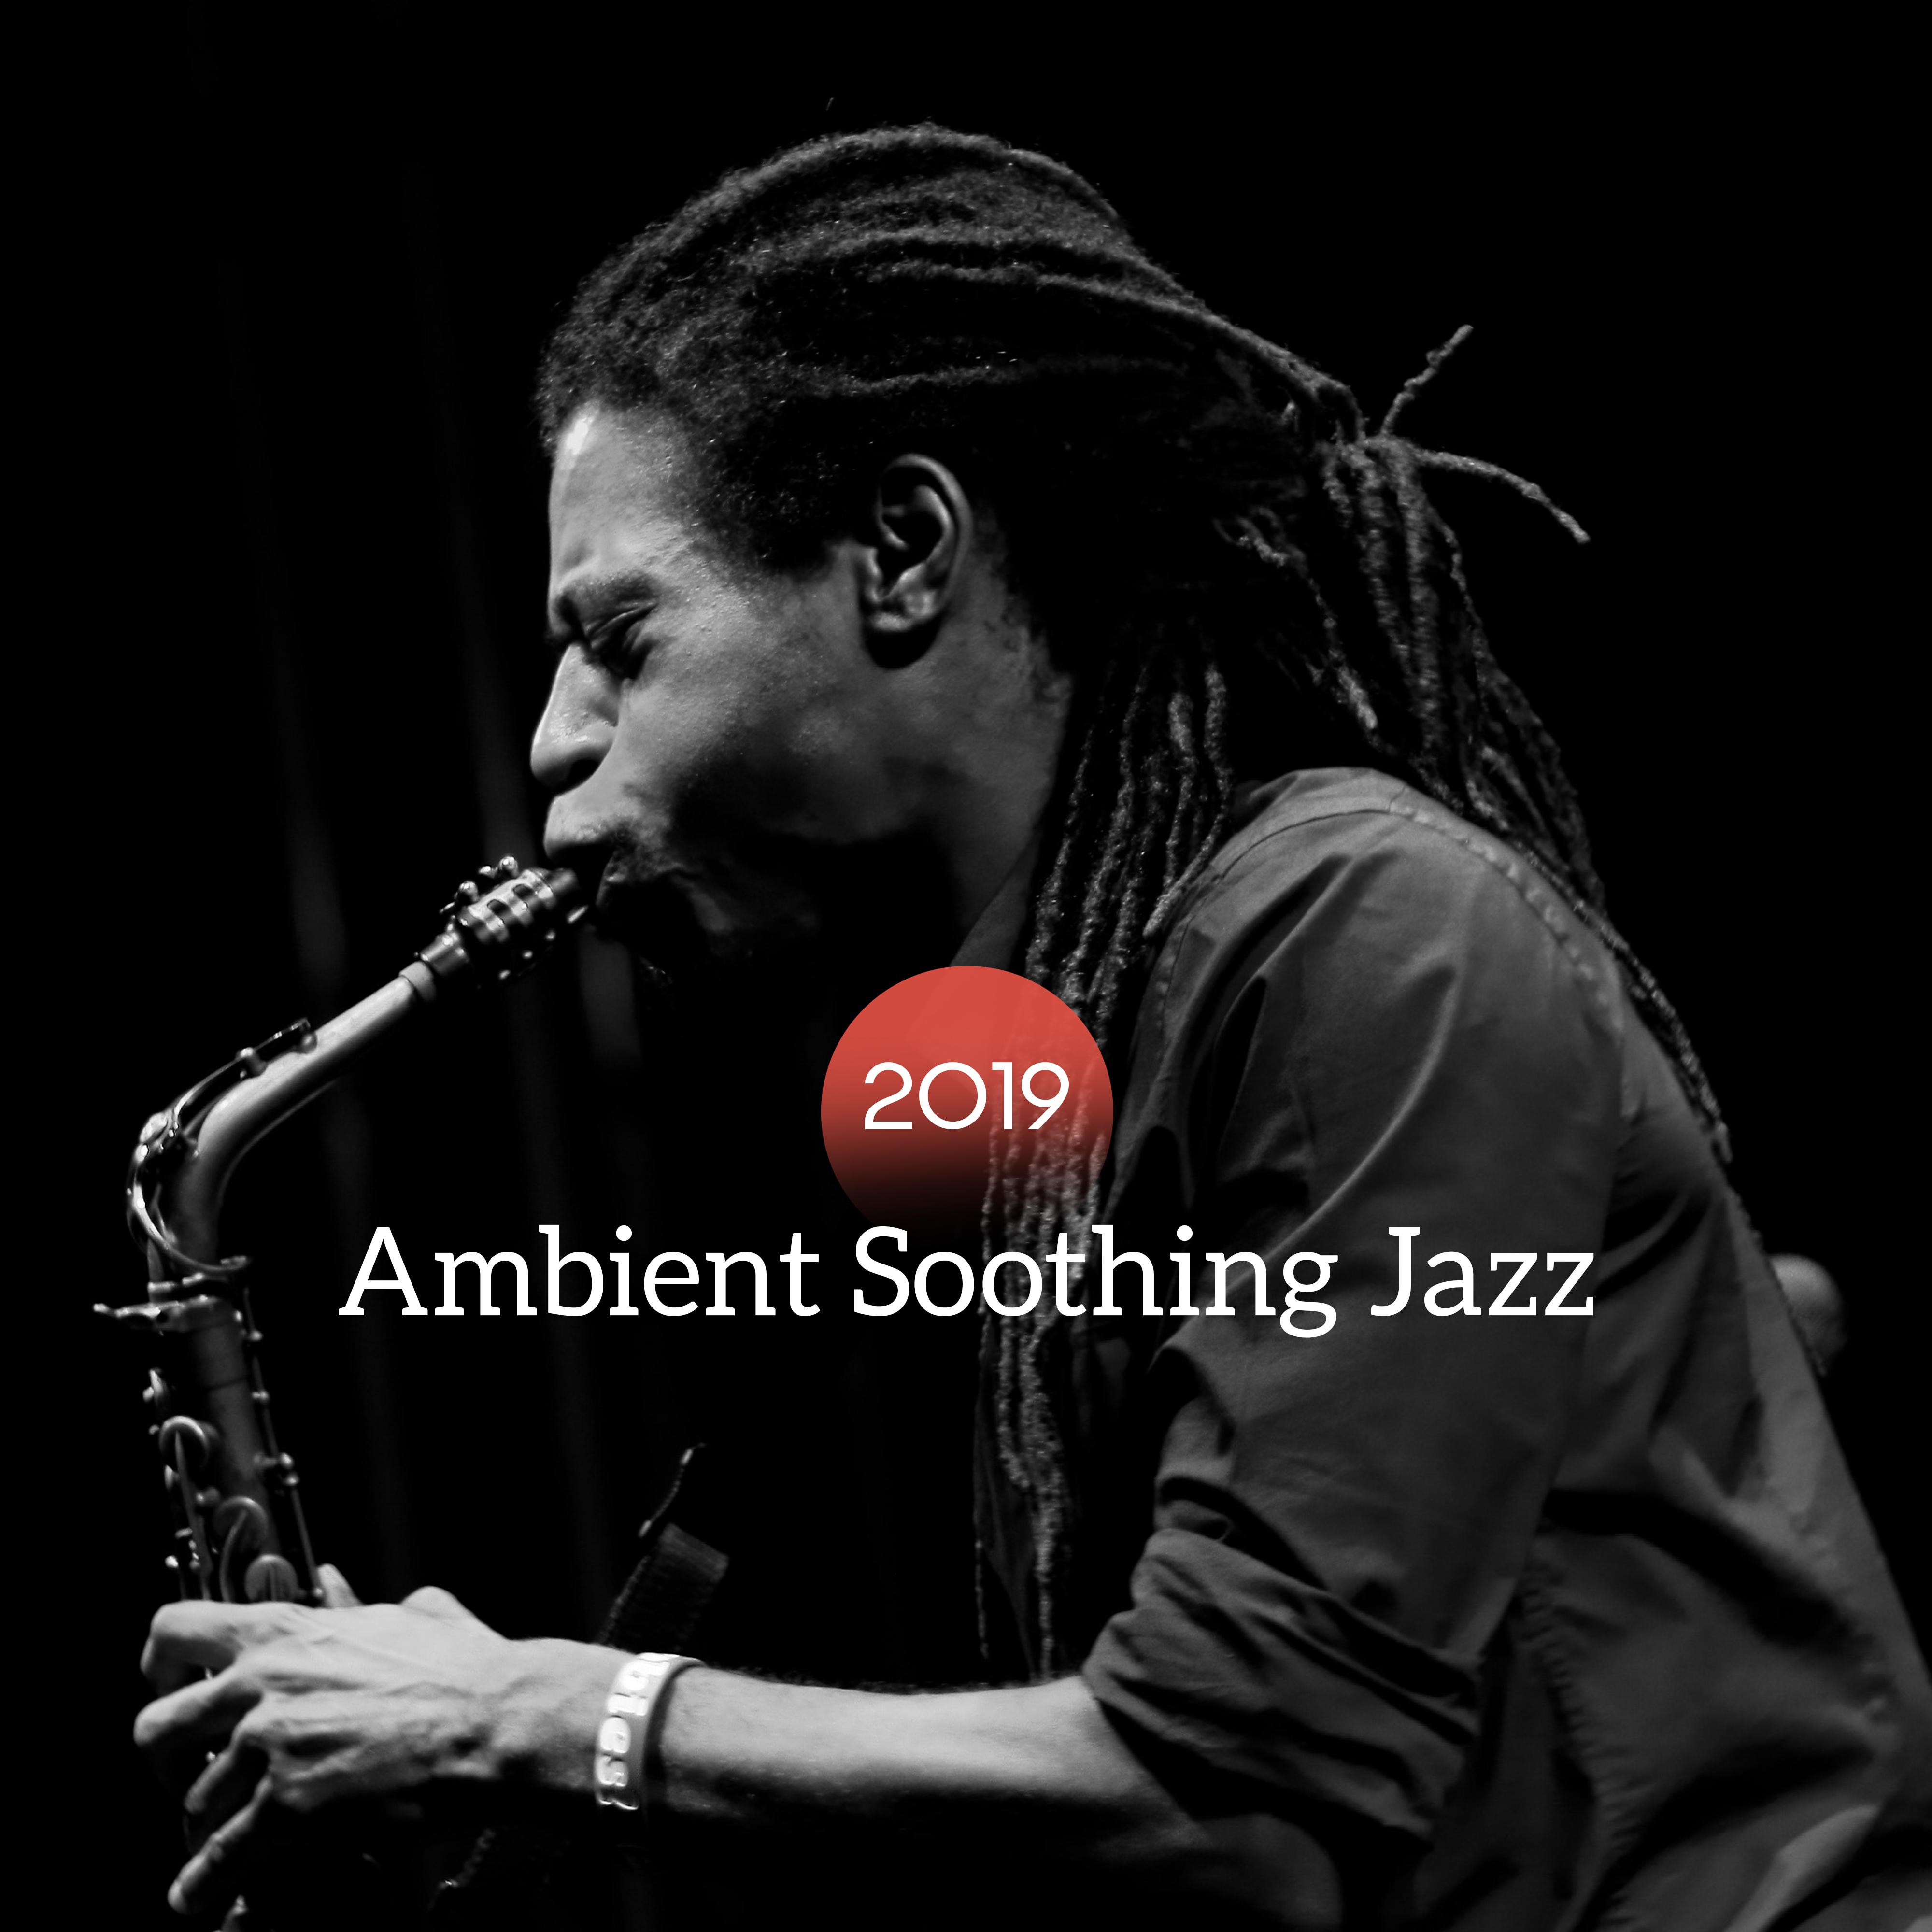 2019 Ambient Soothing Jazz - Easy Listening Jazz Mix, Pure Relax, Instrumental Music to Rest, Ambient Jazz 2019